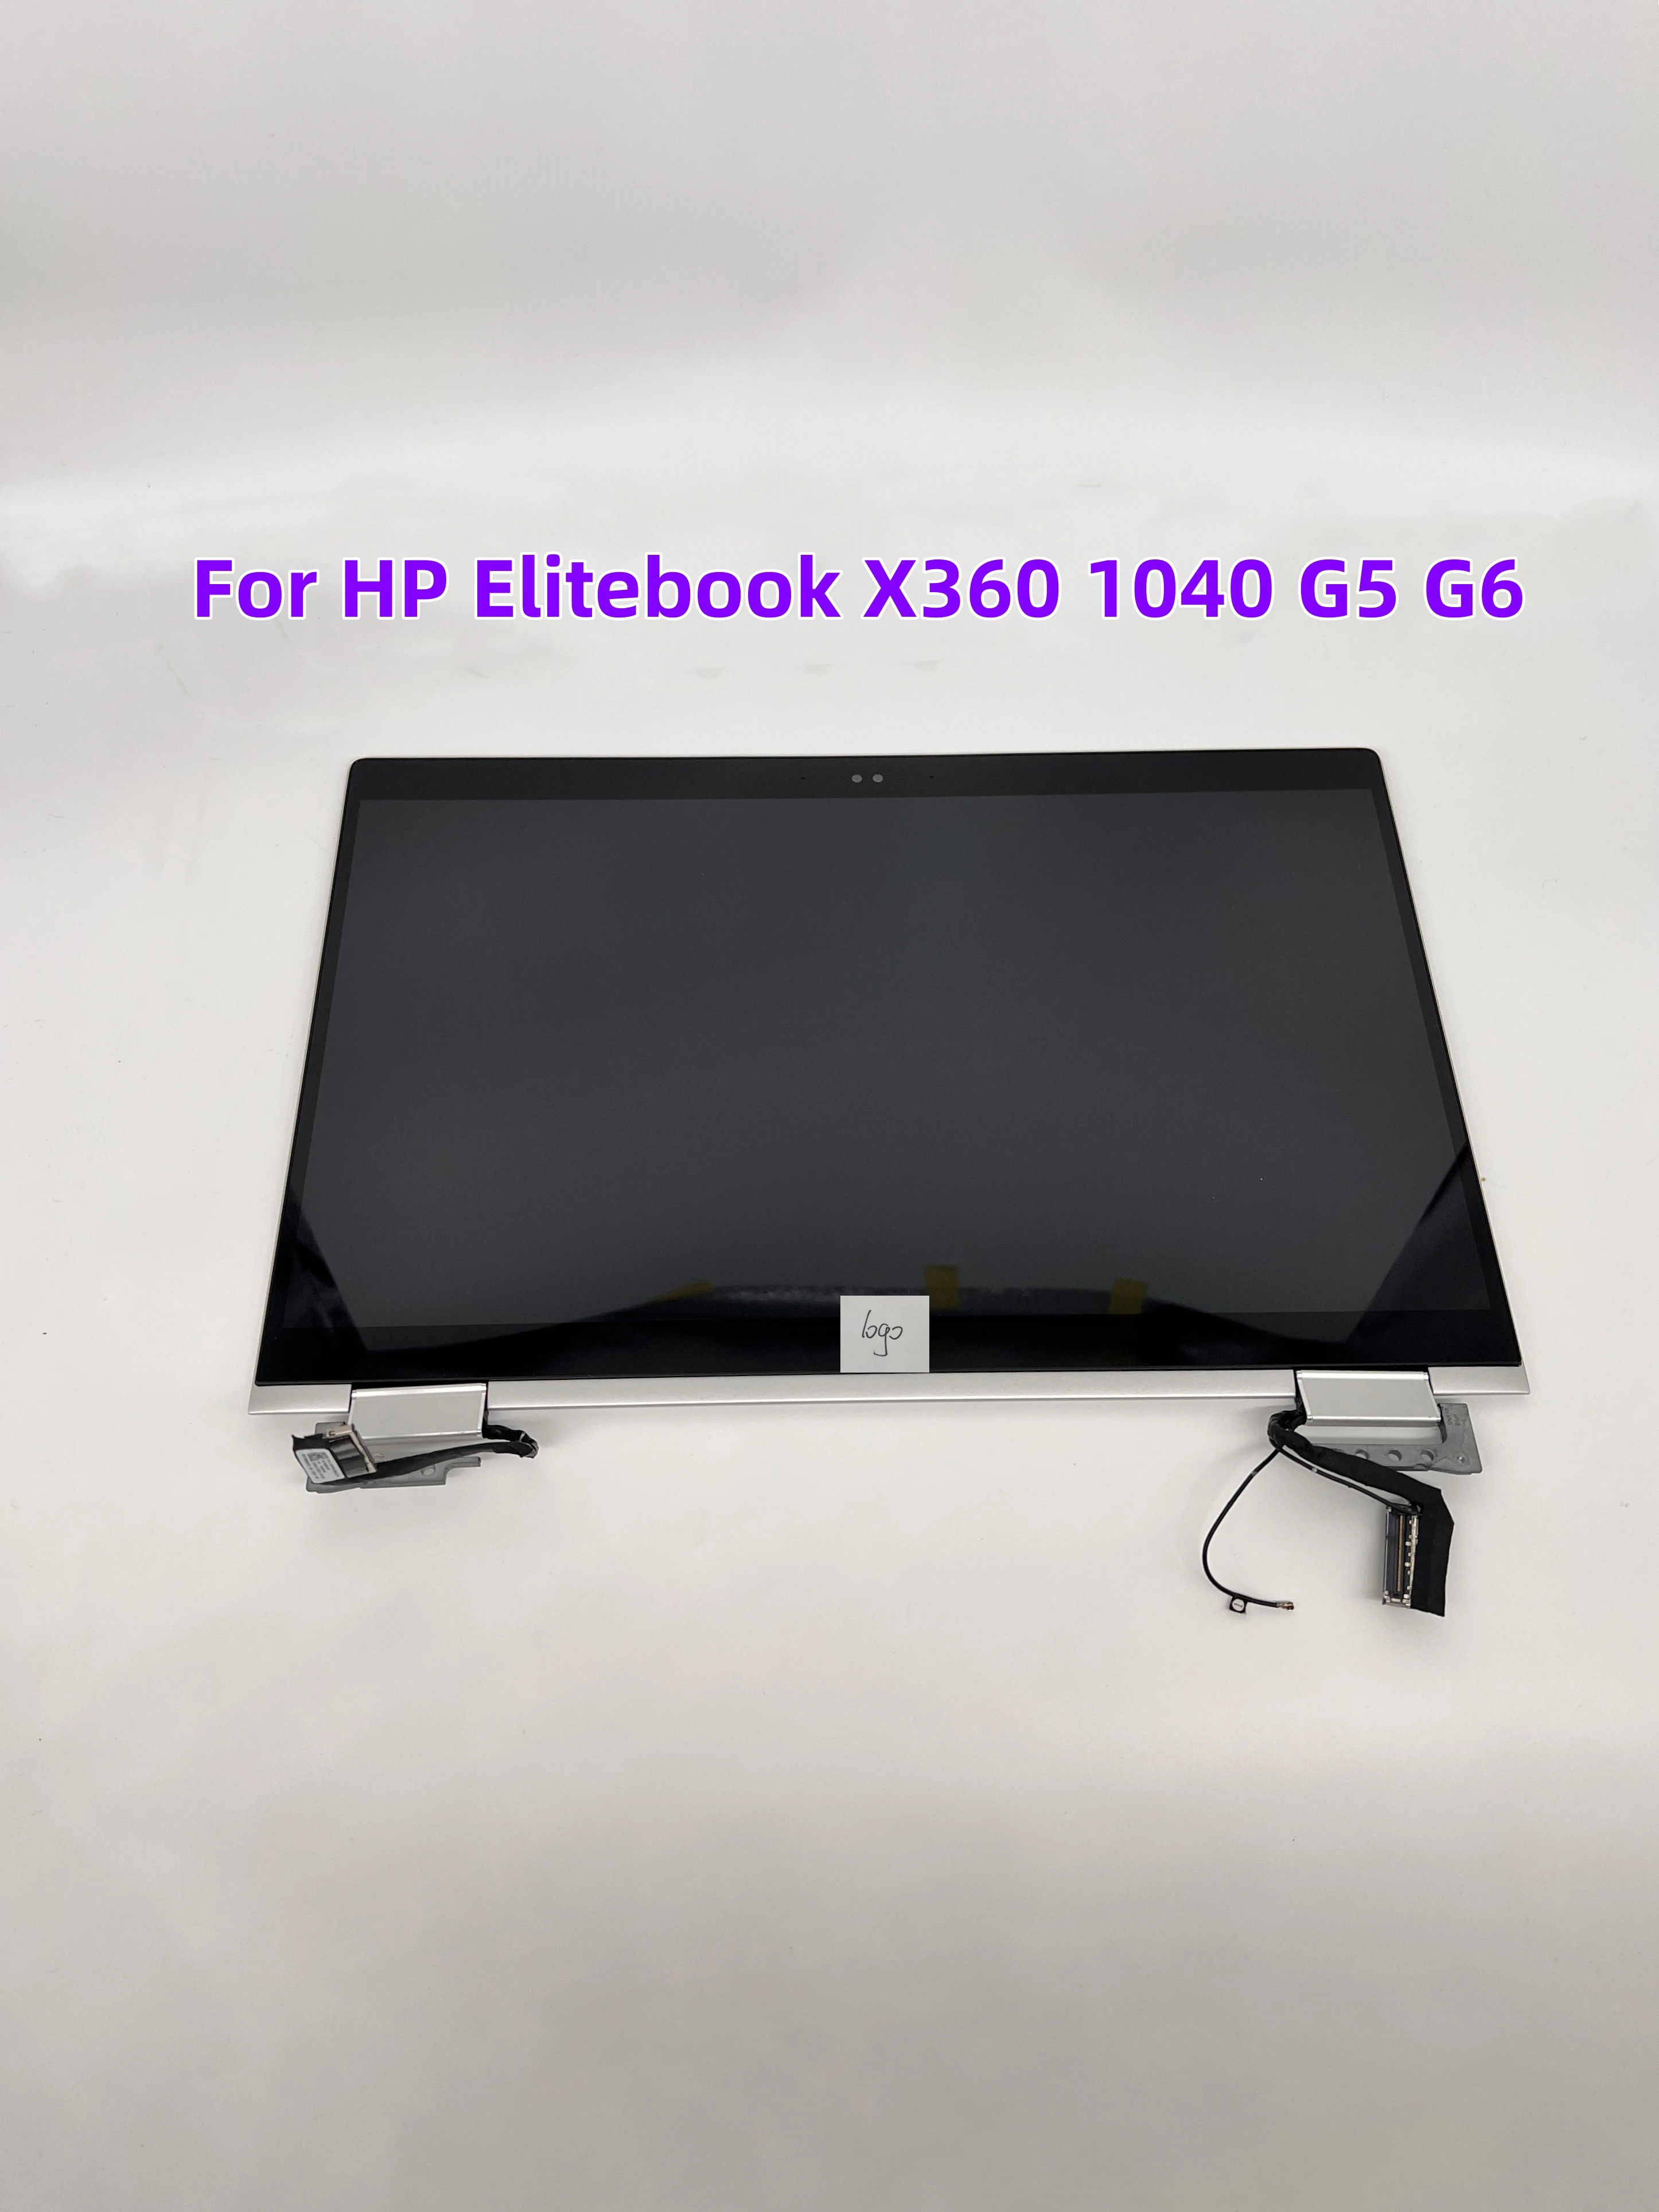 

14Inch FHD UHD For HP EliteBook x360 1040 G5 LCD Touch Screen Replacement Full Assembly With Hinges L42962-001 L42311-001